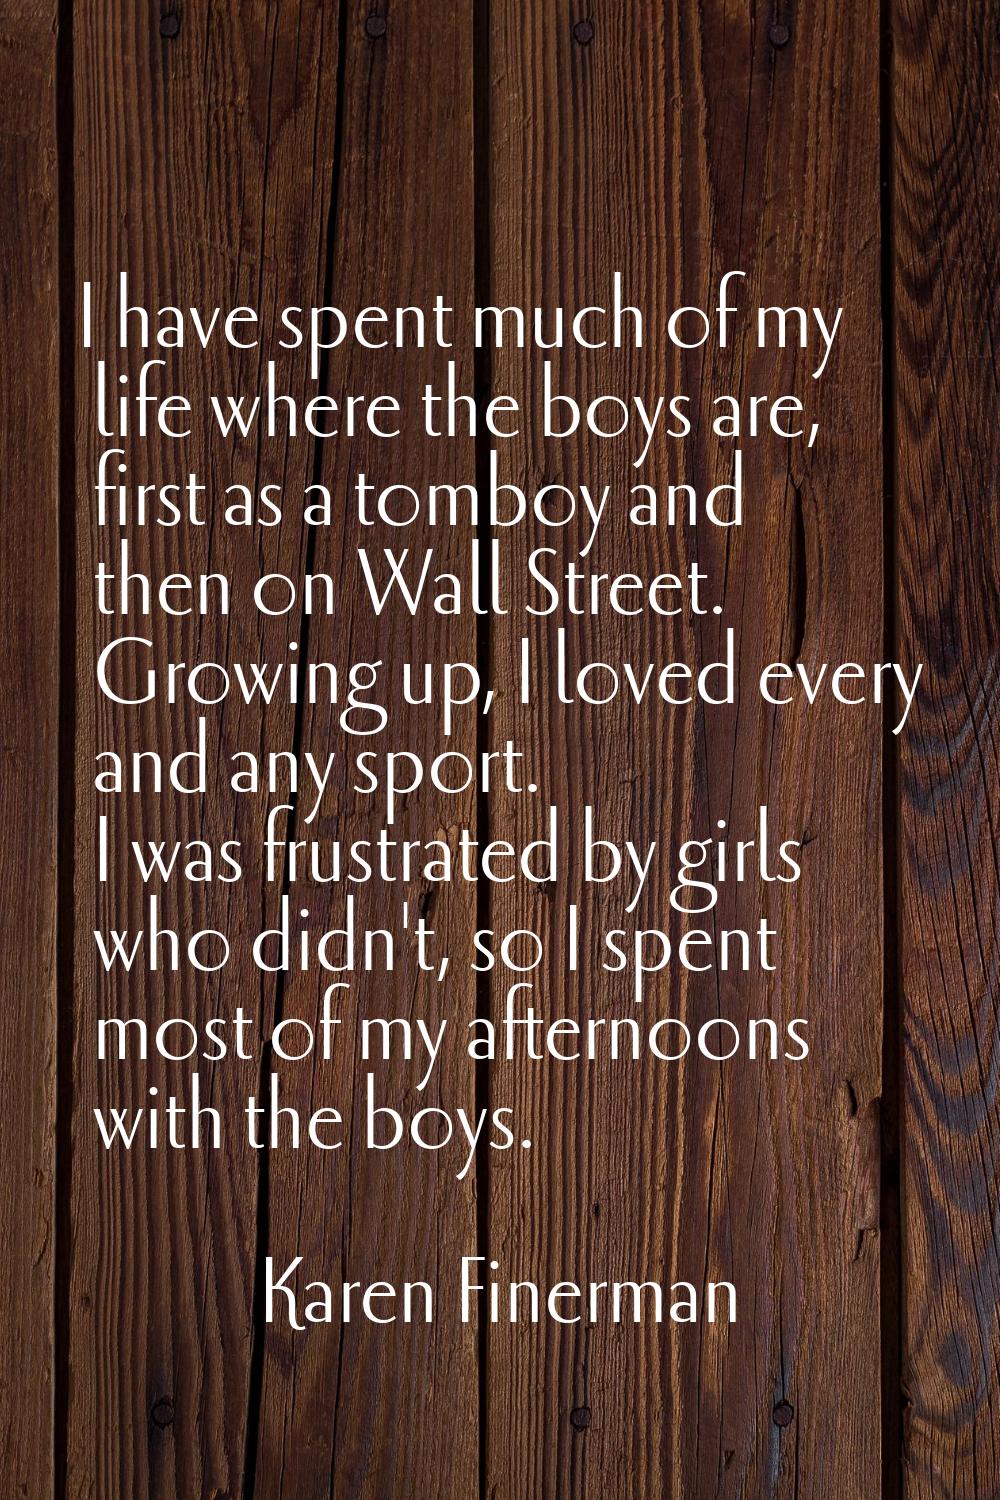 I have spent much of my life where the boys are, first as a tomboy and then on Wall Street. Growing